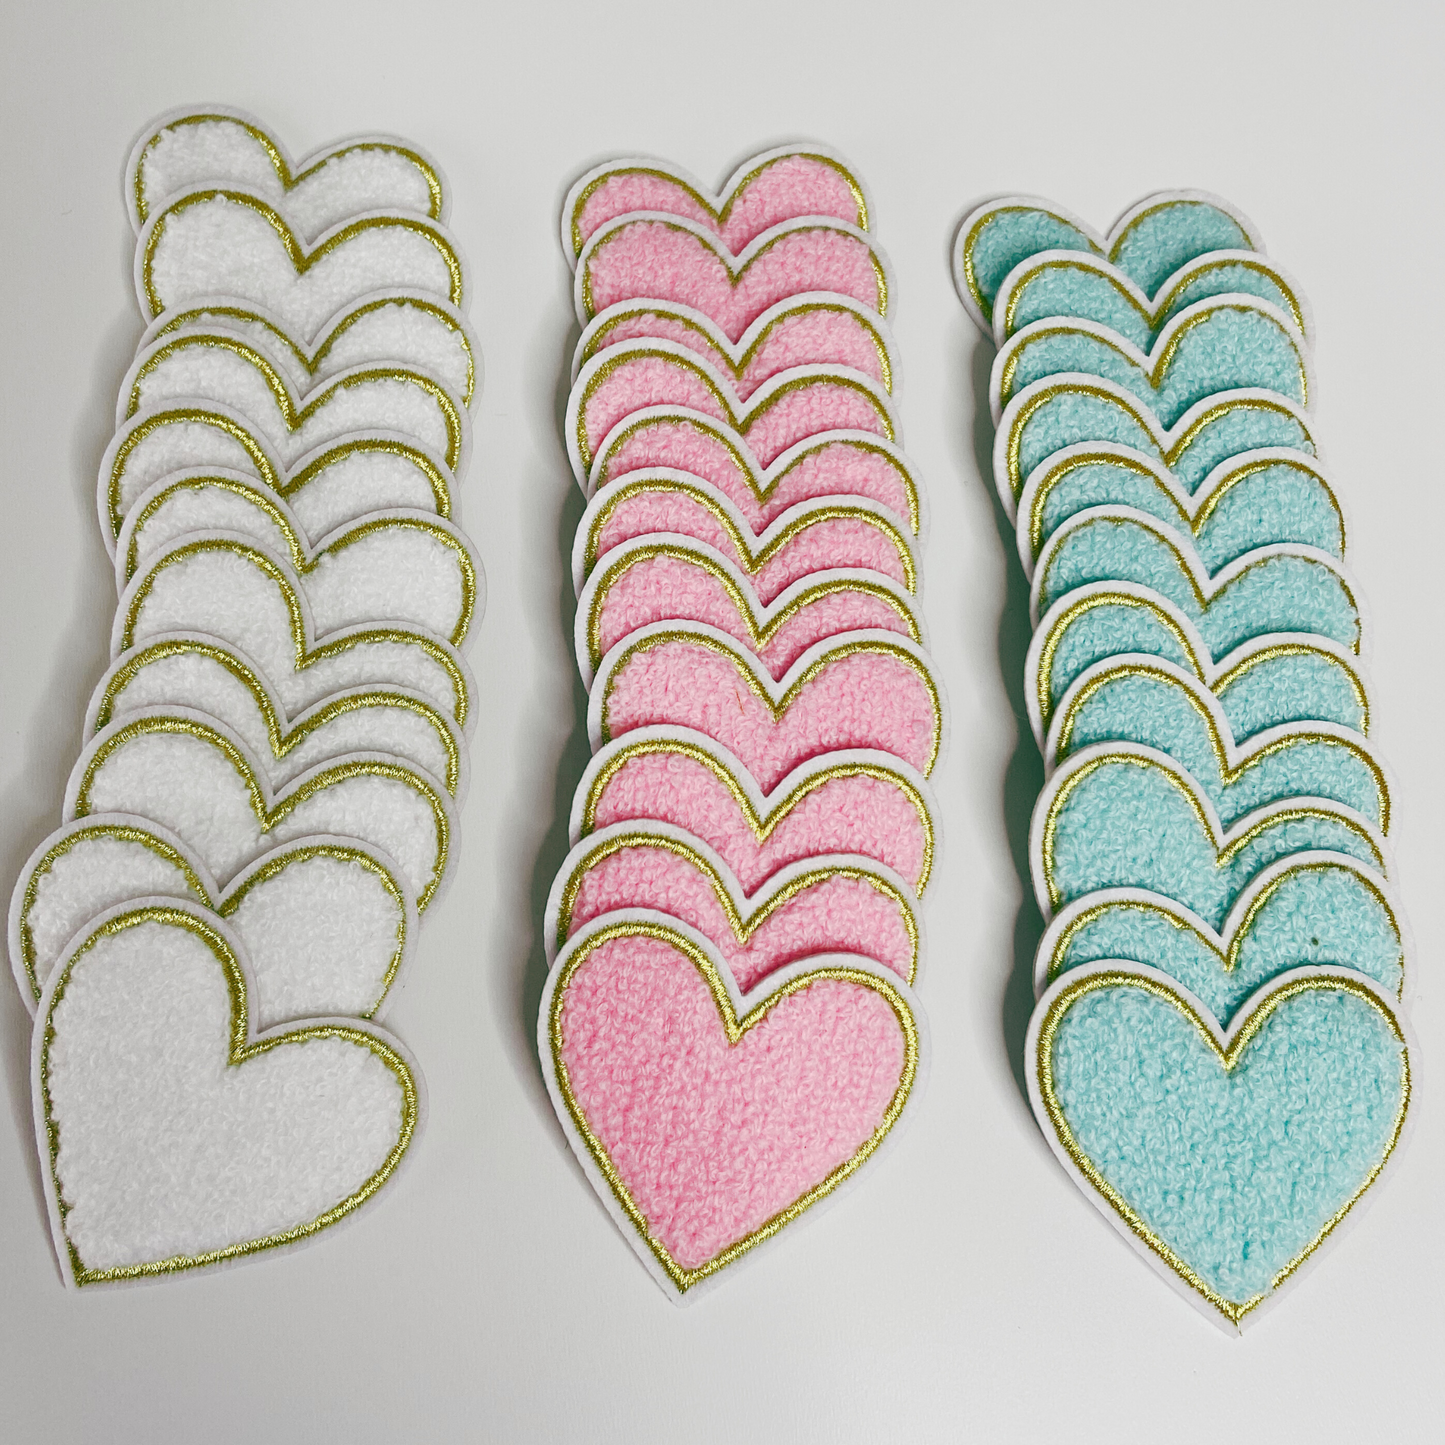 Small Chenille Heart Patch  - 2.5" x 2"  Pink, Teal or White hat patch